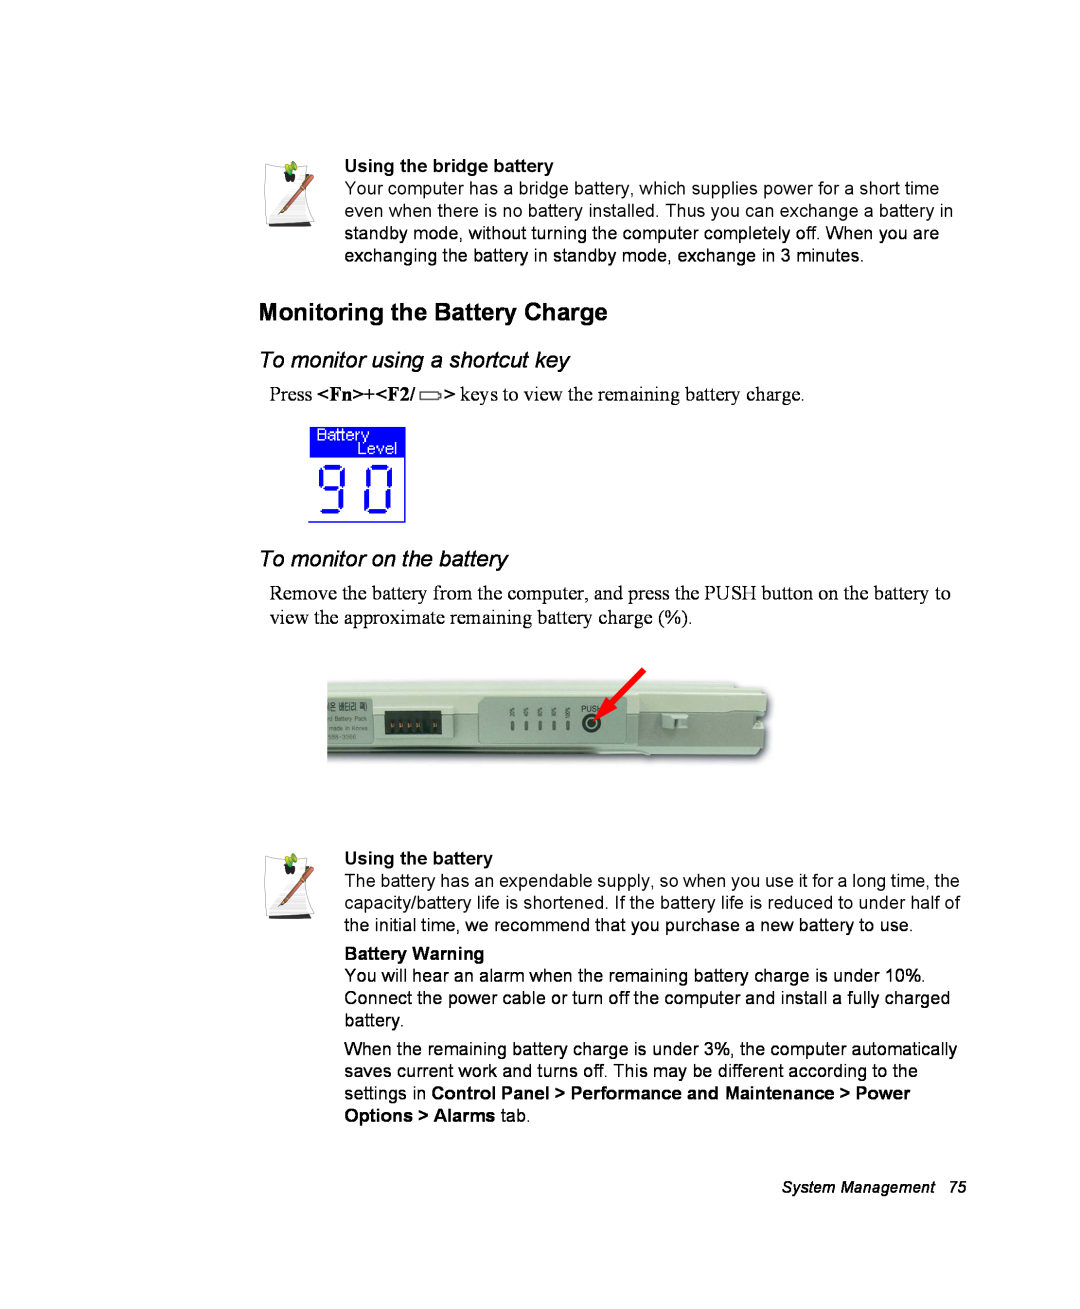 Samsung NM40TJ0MG9/SEF manual Monitoring the Battery Charge, To monitor using a shortcut key, To monitor on the battery 